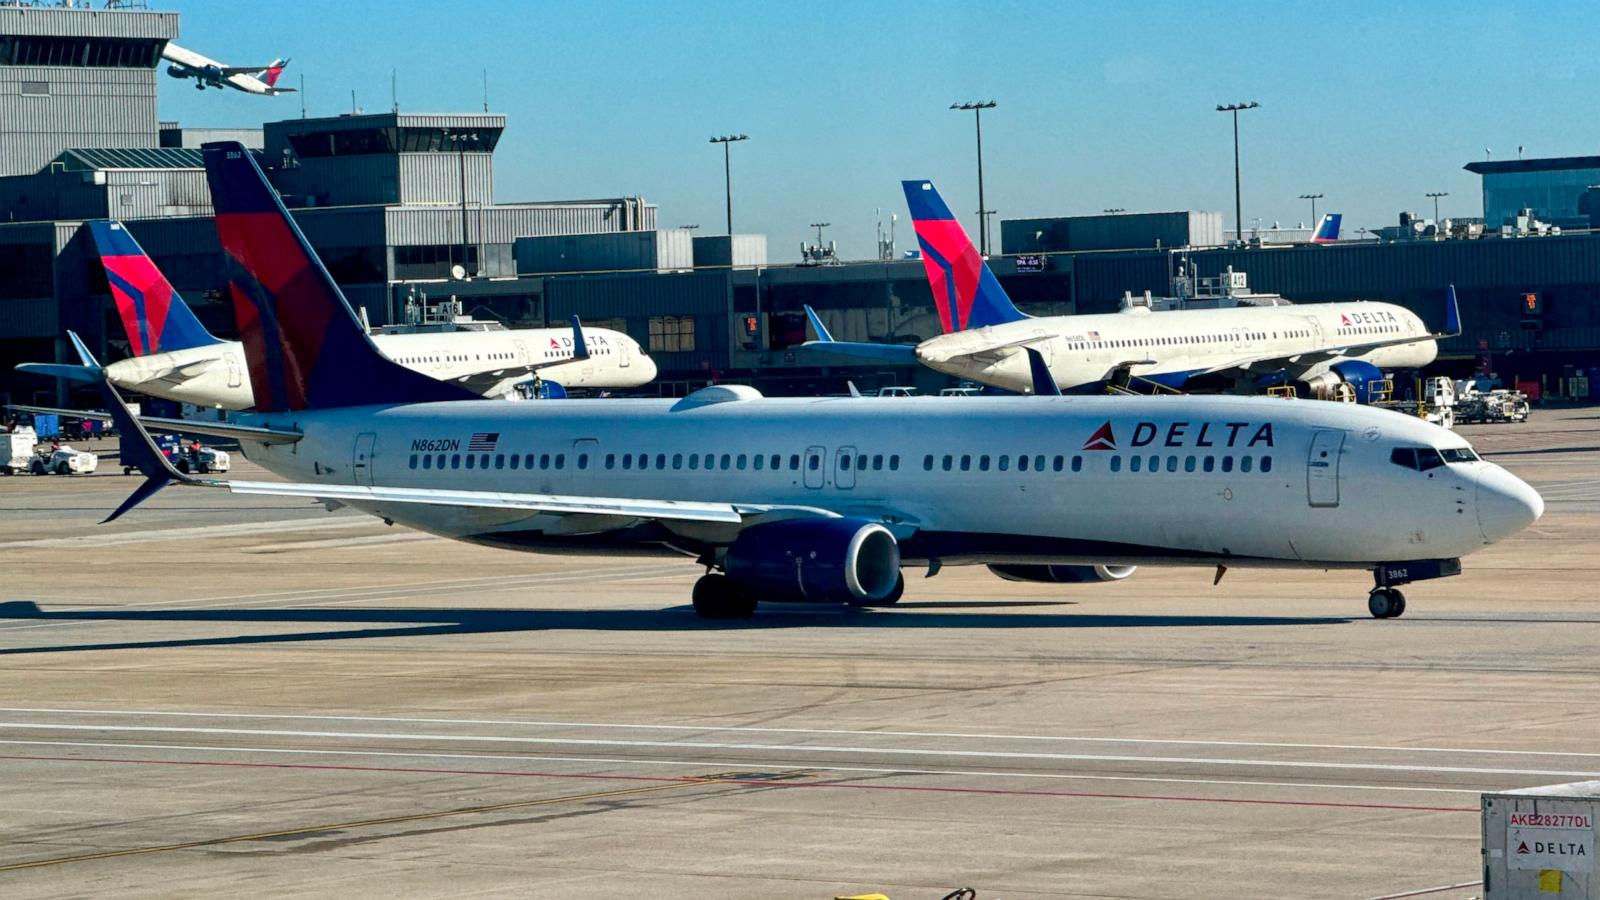 Delta flight carrying 270 diverted to remote Canadian town - ABC News